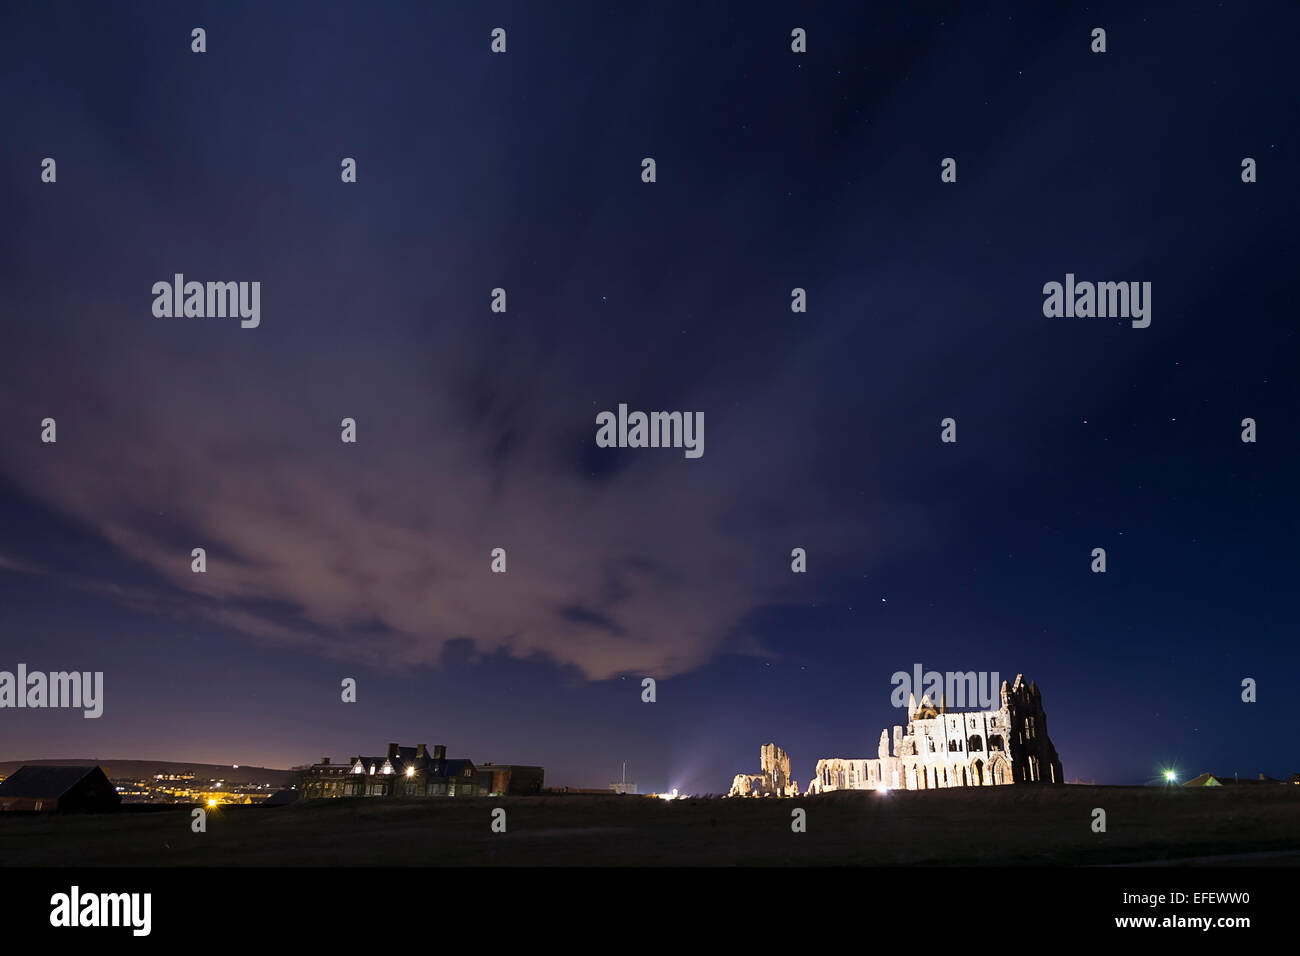 Landscape photograph of Whitby Abbey taken at night, showing a starry night sky with some cloud. Stock Photo